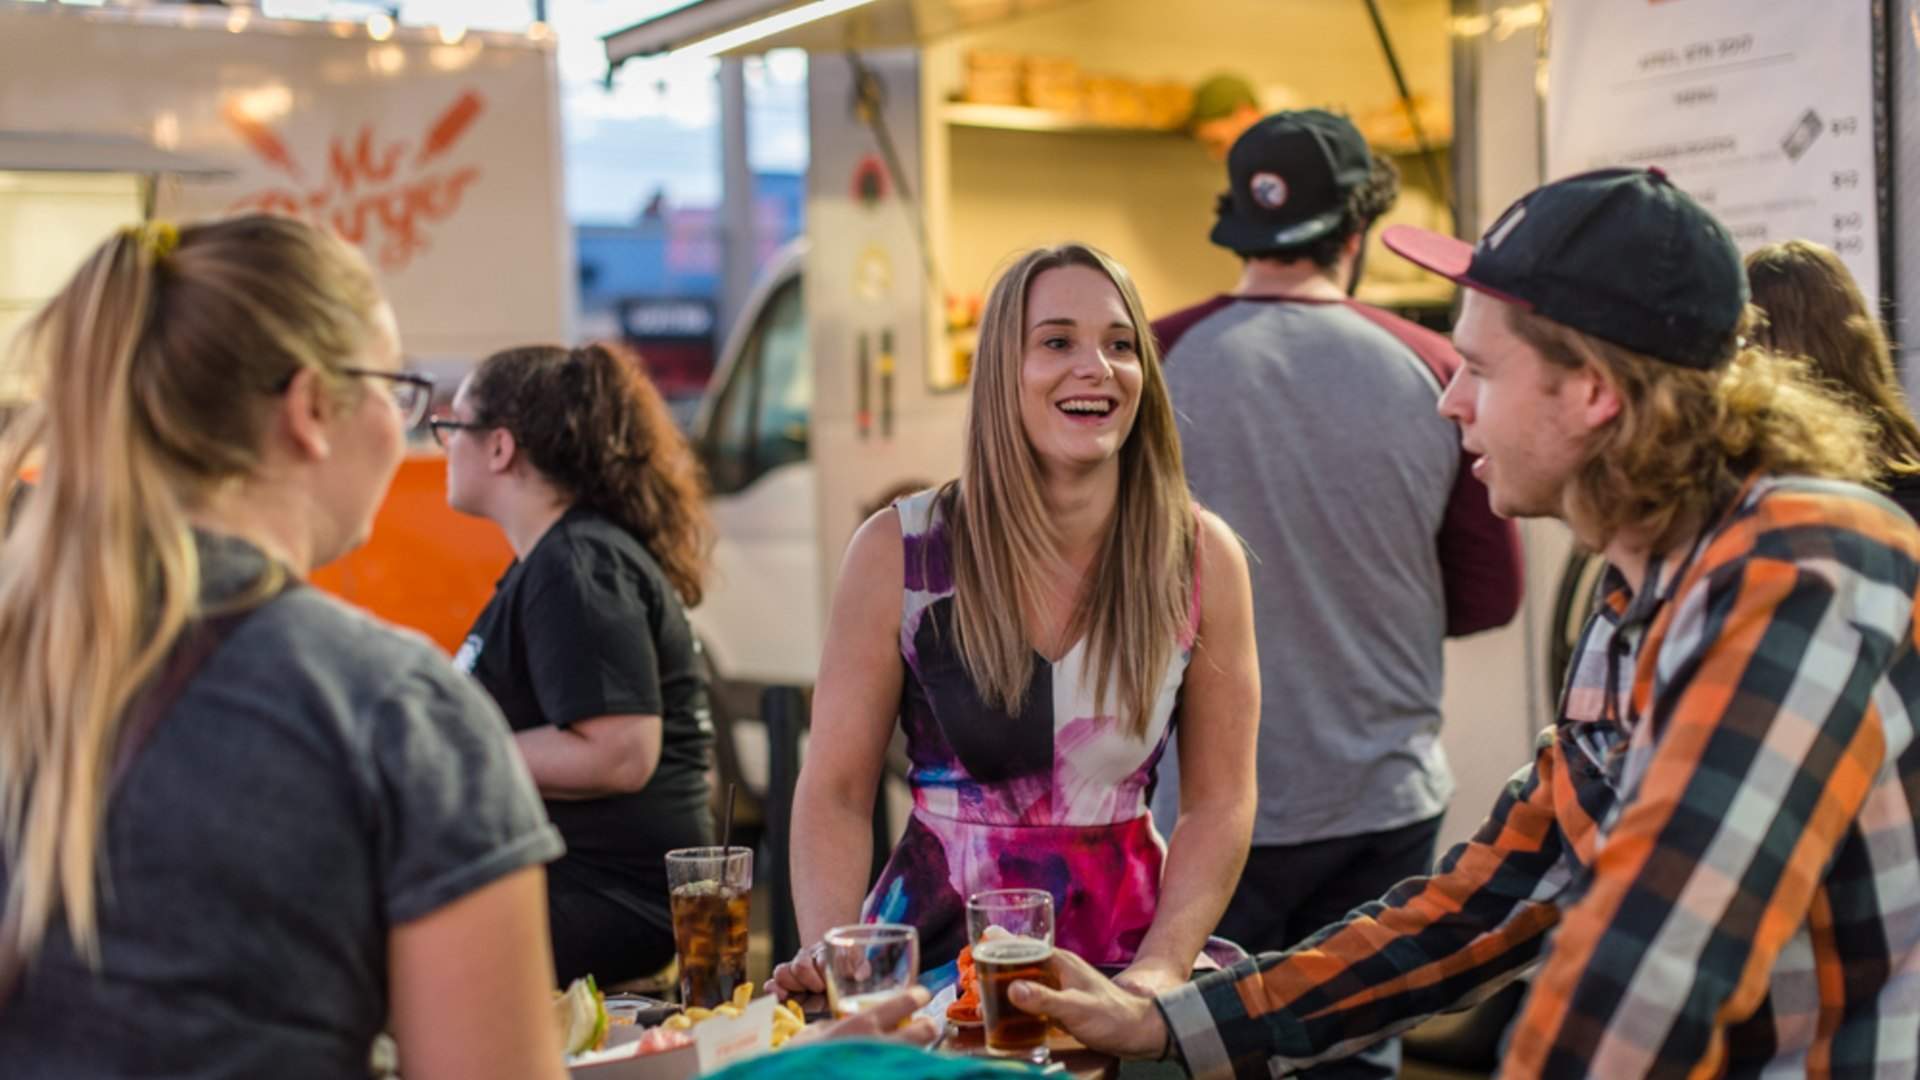 Brunswick Is Getting a New Food Truck Park from the Minds Behind Welcome to Thornbury